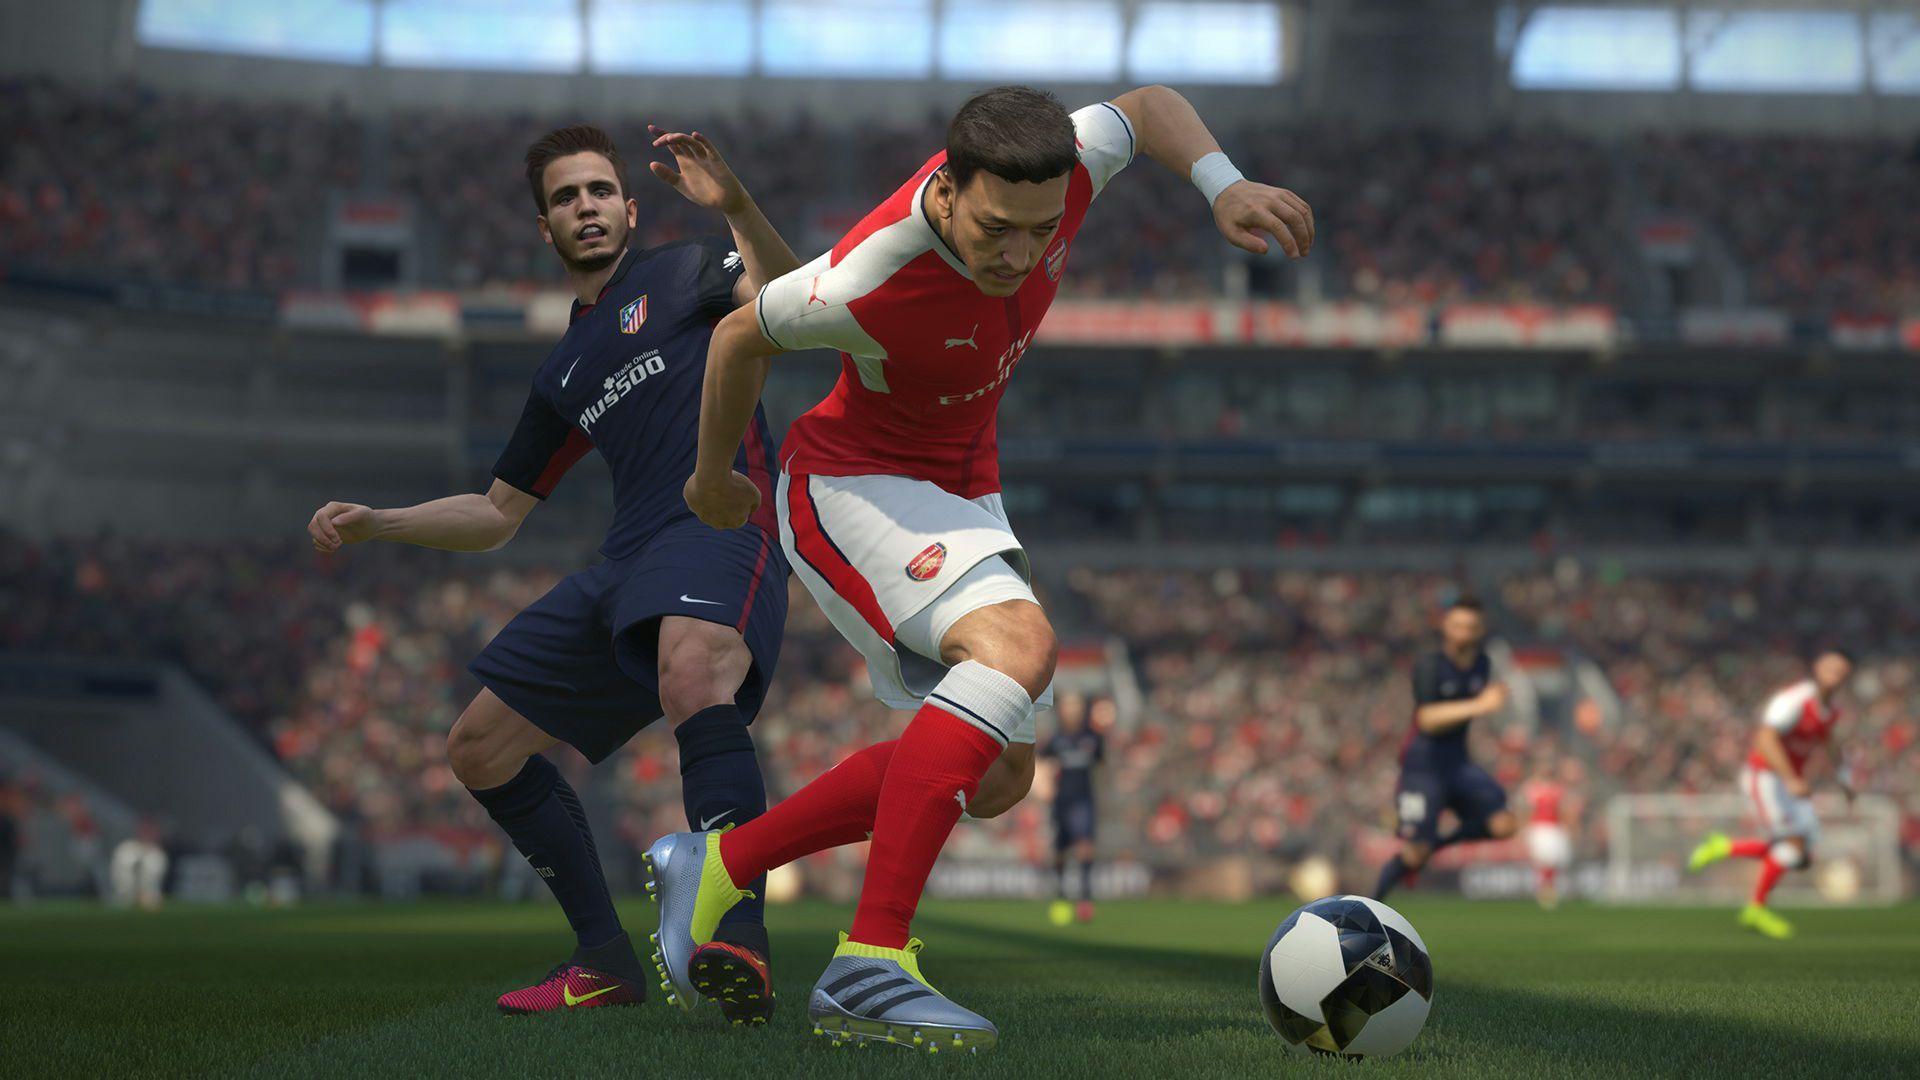 PES 2018 UK release date, price, platforms and features